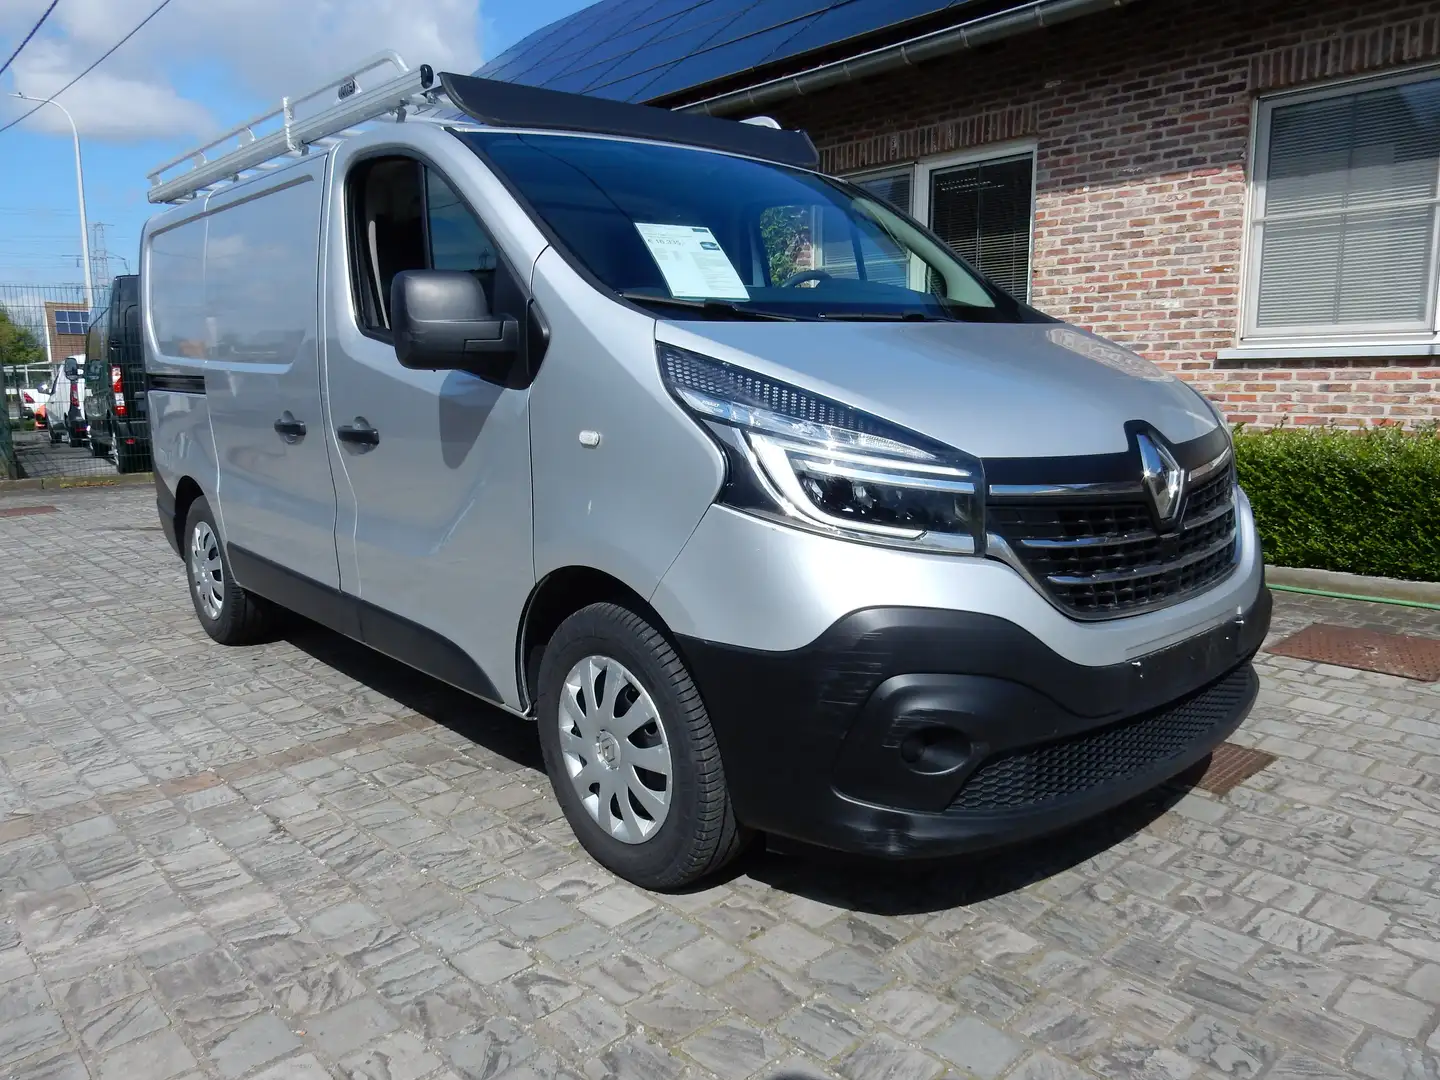 Renault Trafic 1.6dci LED bagagerek (13500Netto+Btw/Tva) Argent - 2